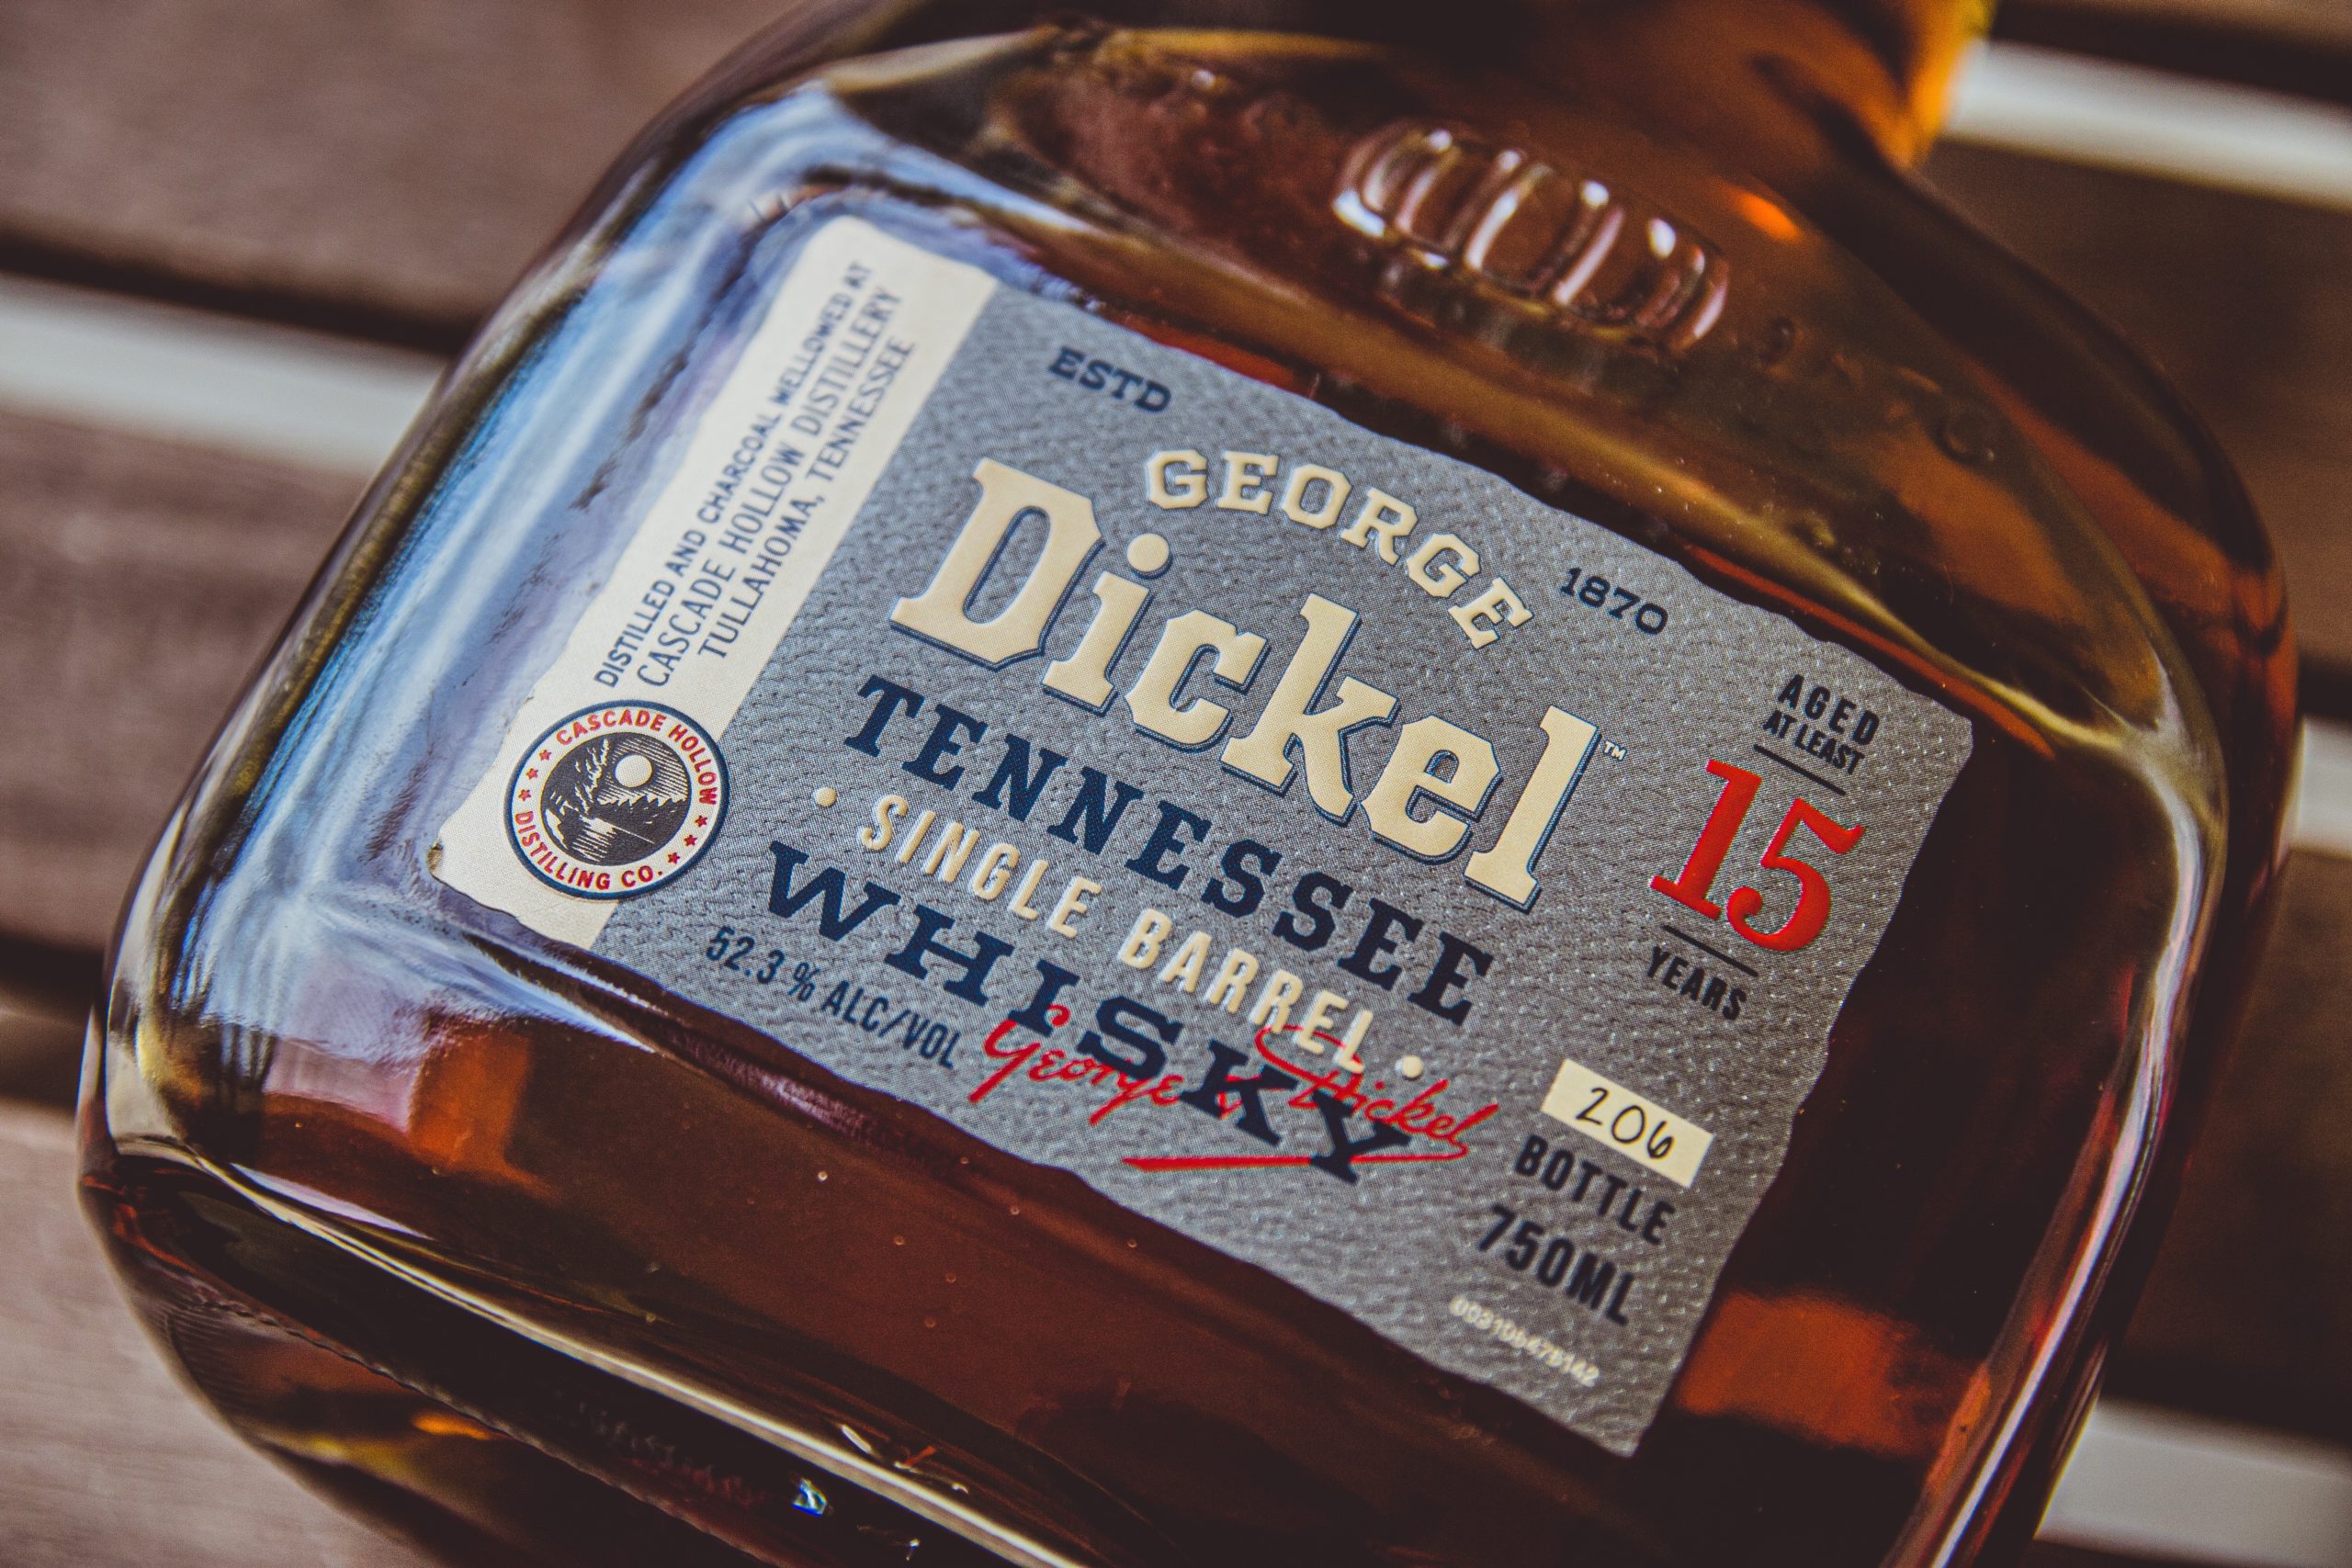 You are currently viewing George Dickel 15 Year Single Barrel Tennessee Whisky